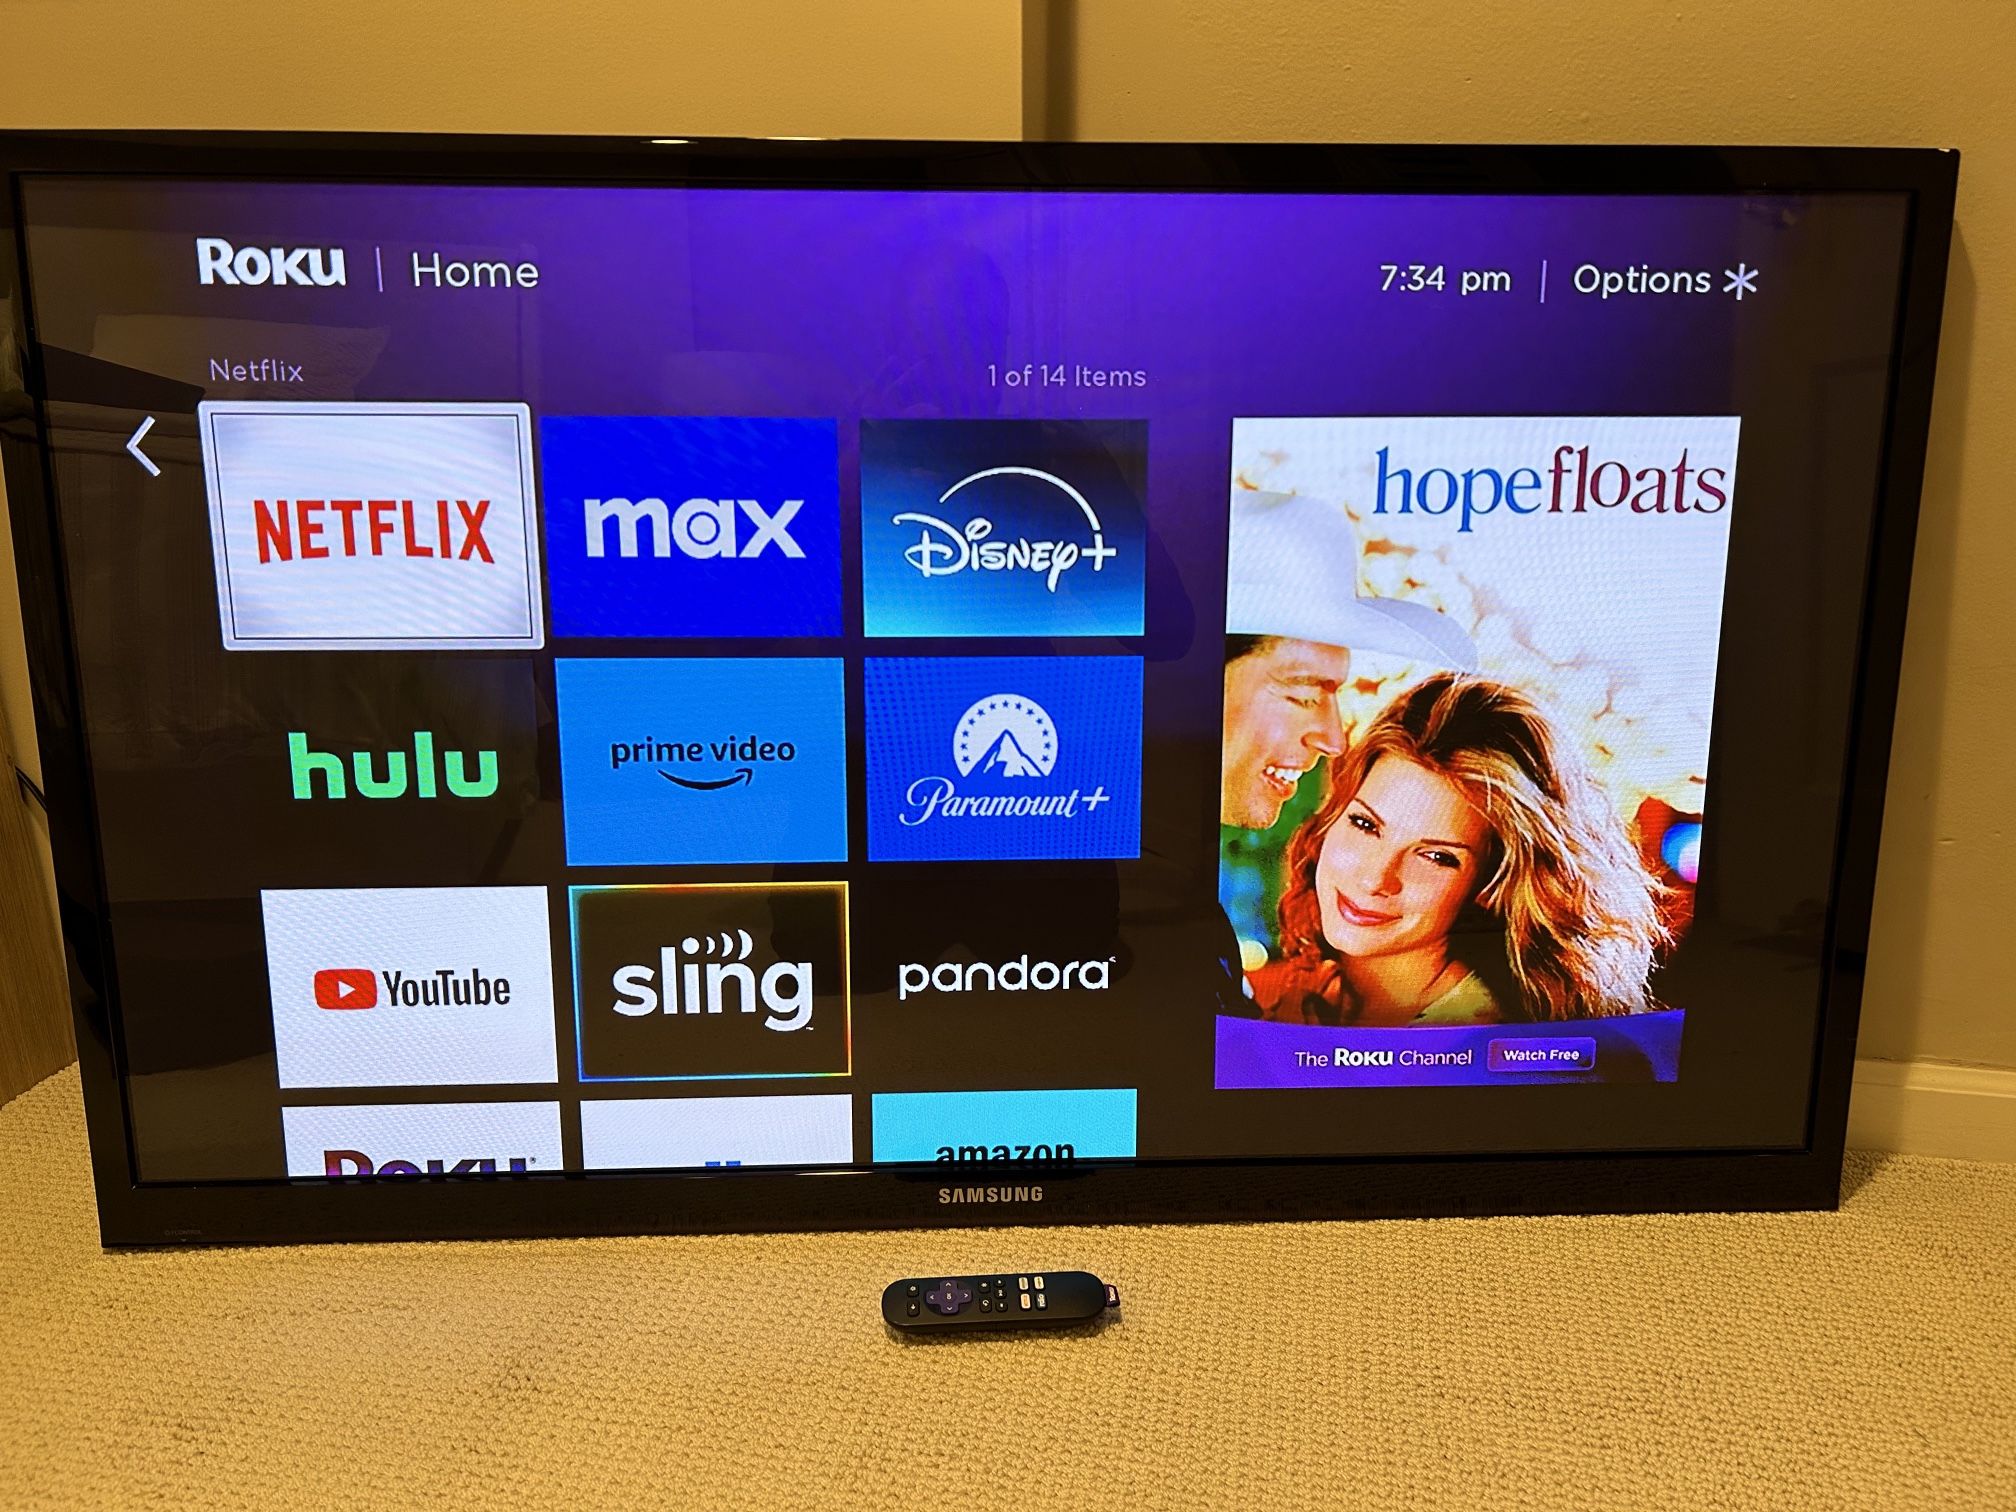 51” Inch Plasma Display Television With Wall mount And Roku Stick Attached